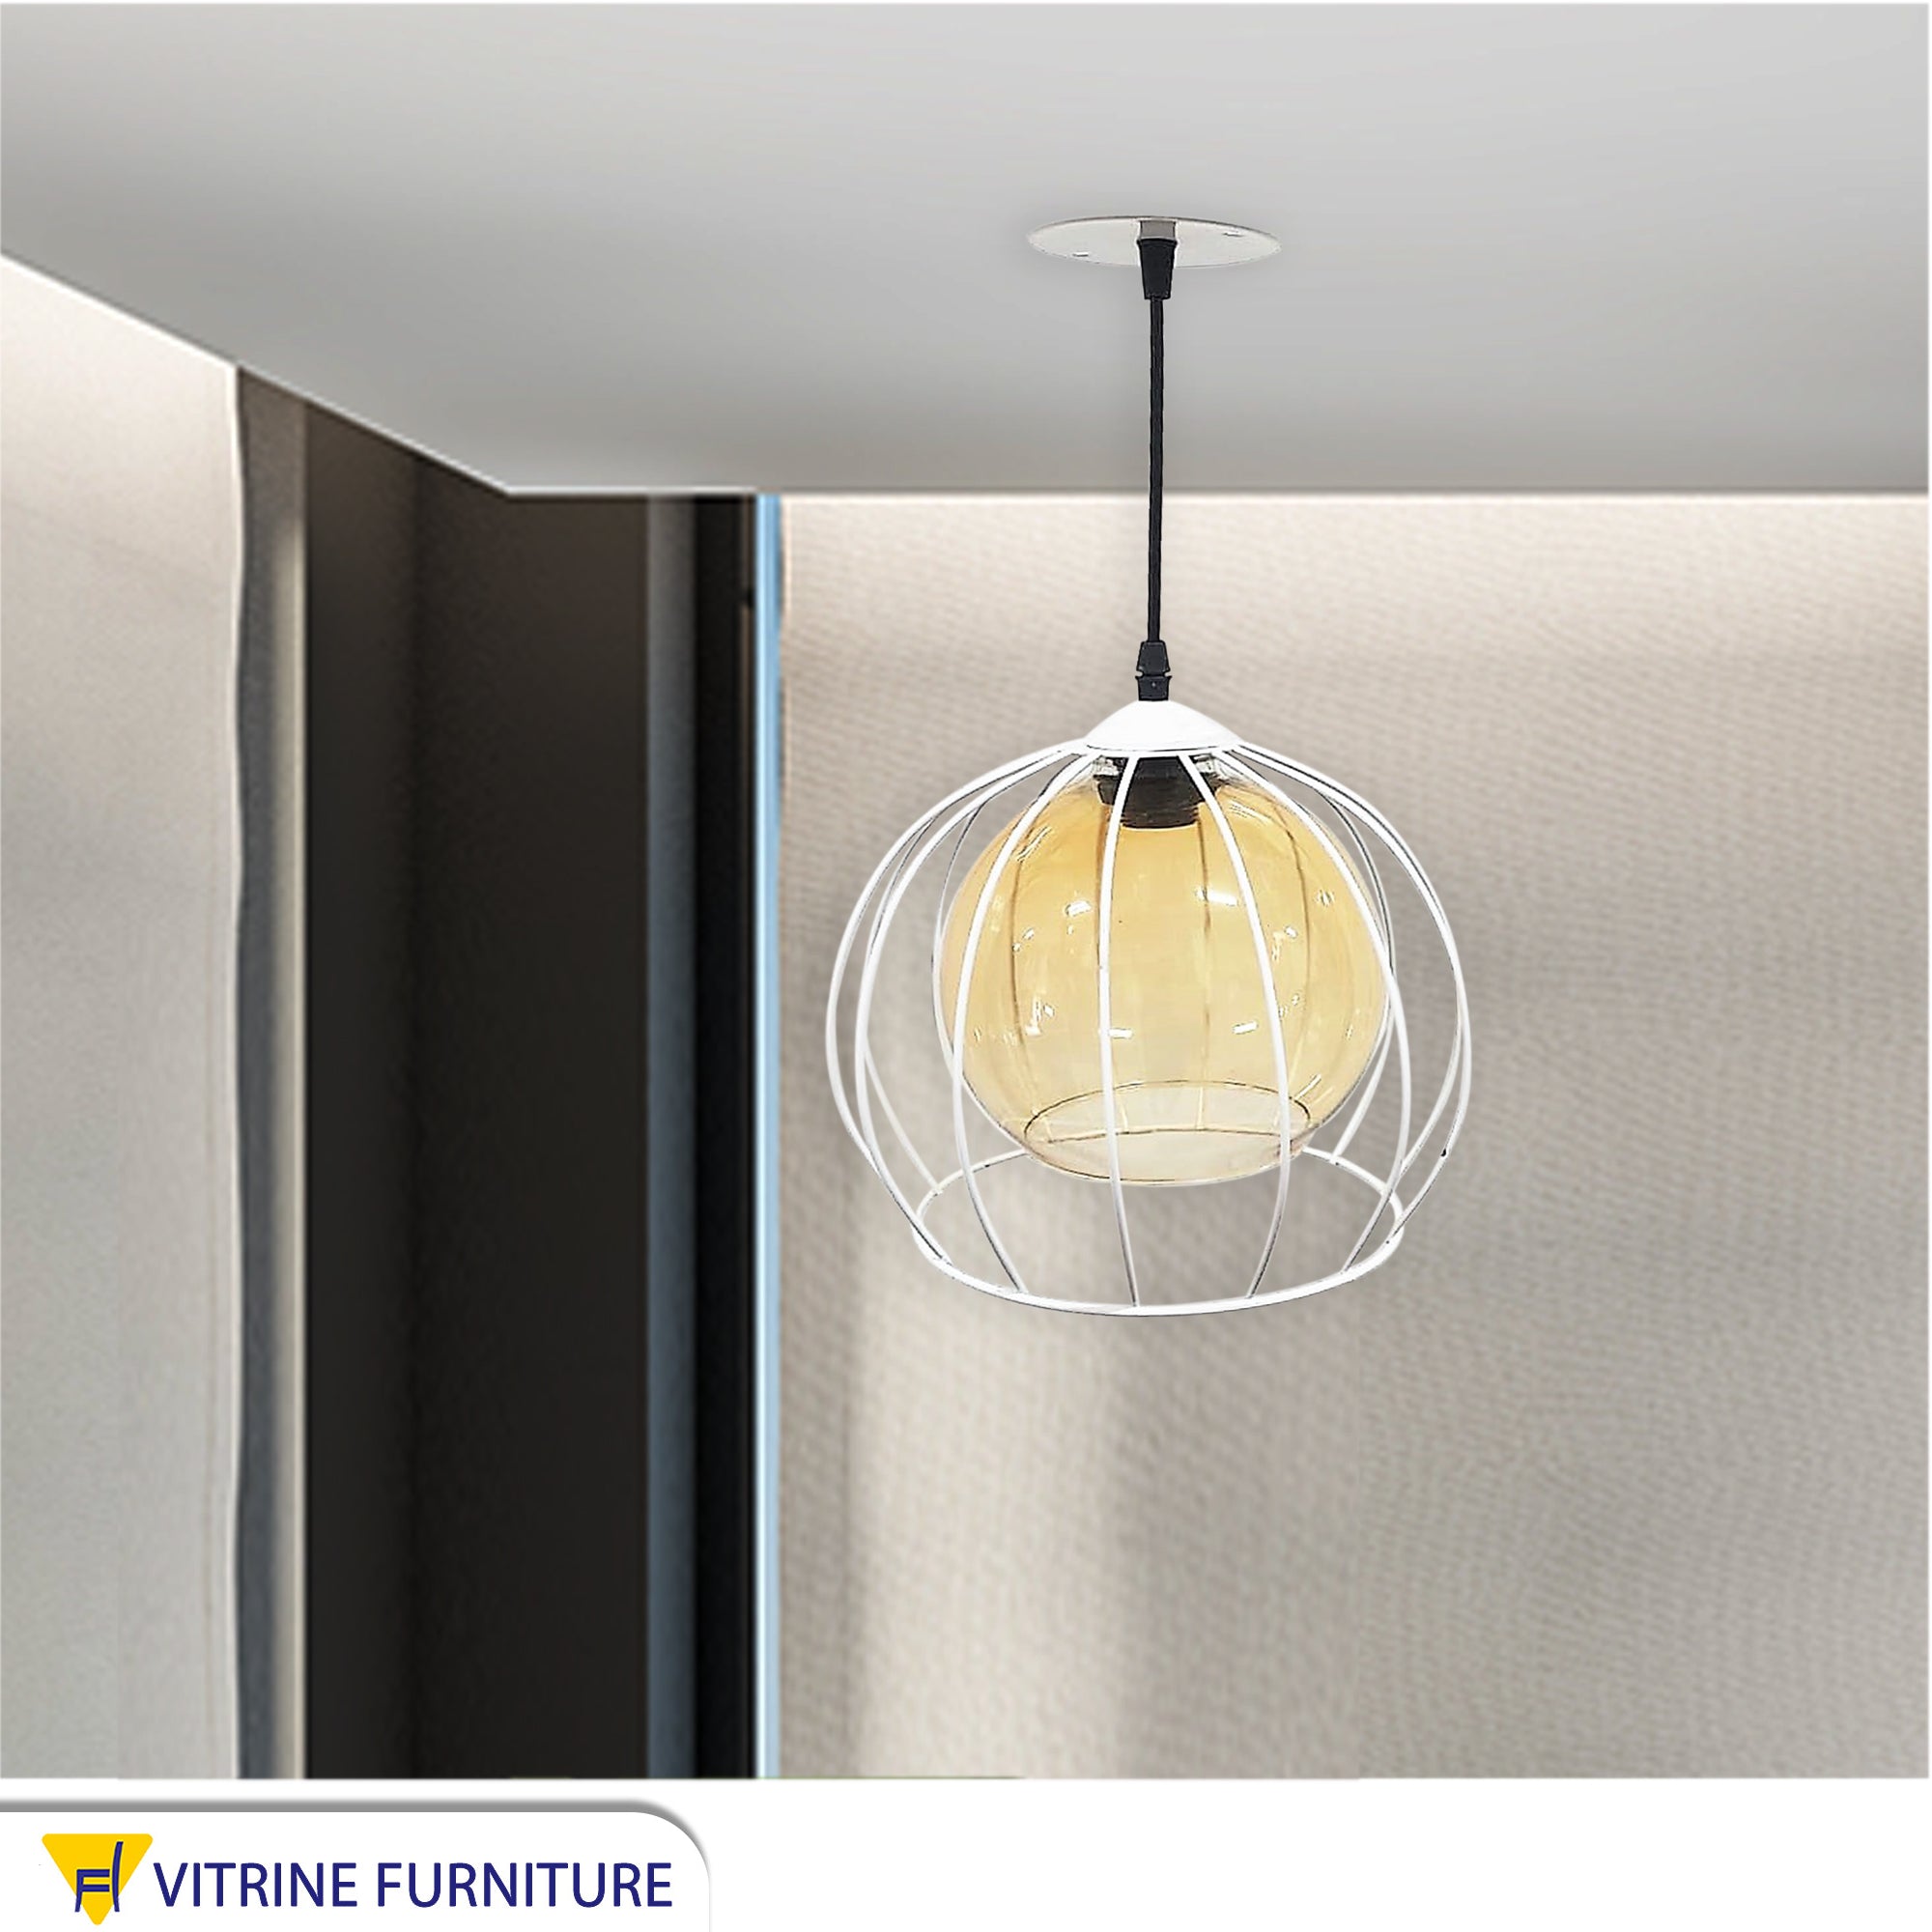 White ceiling lamp with clear glass